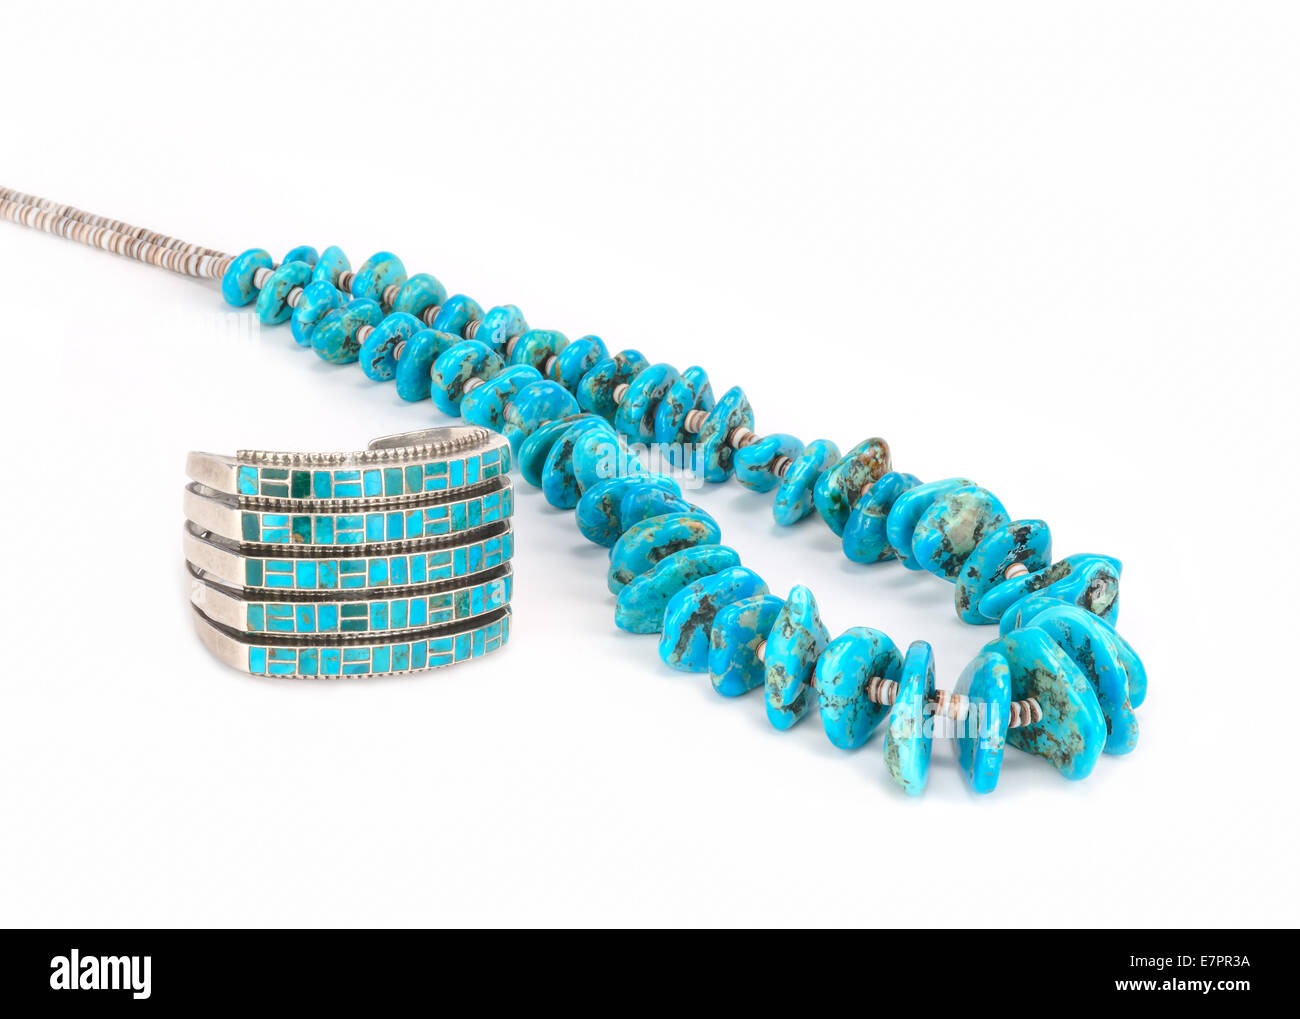 Native American Turquoise Bead Necklace and Bracelet. Stock Photo